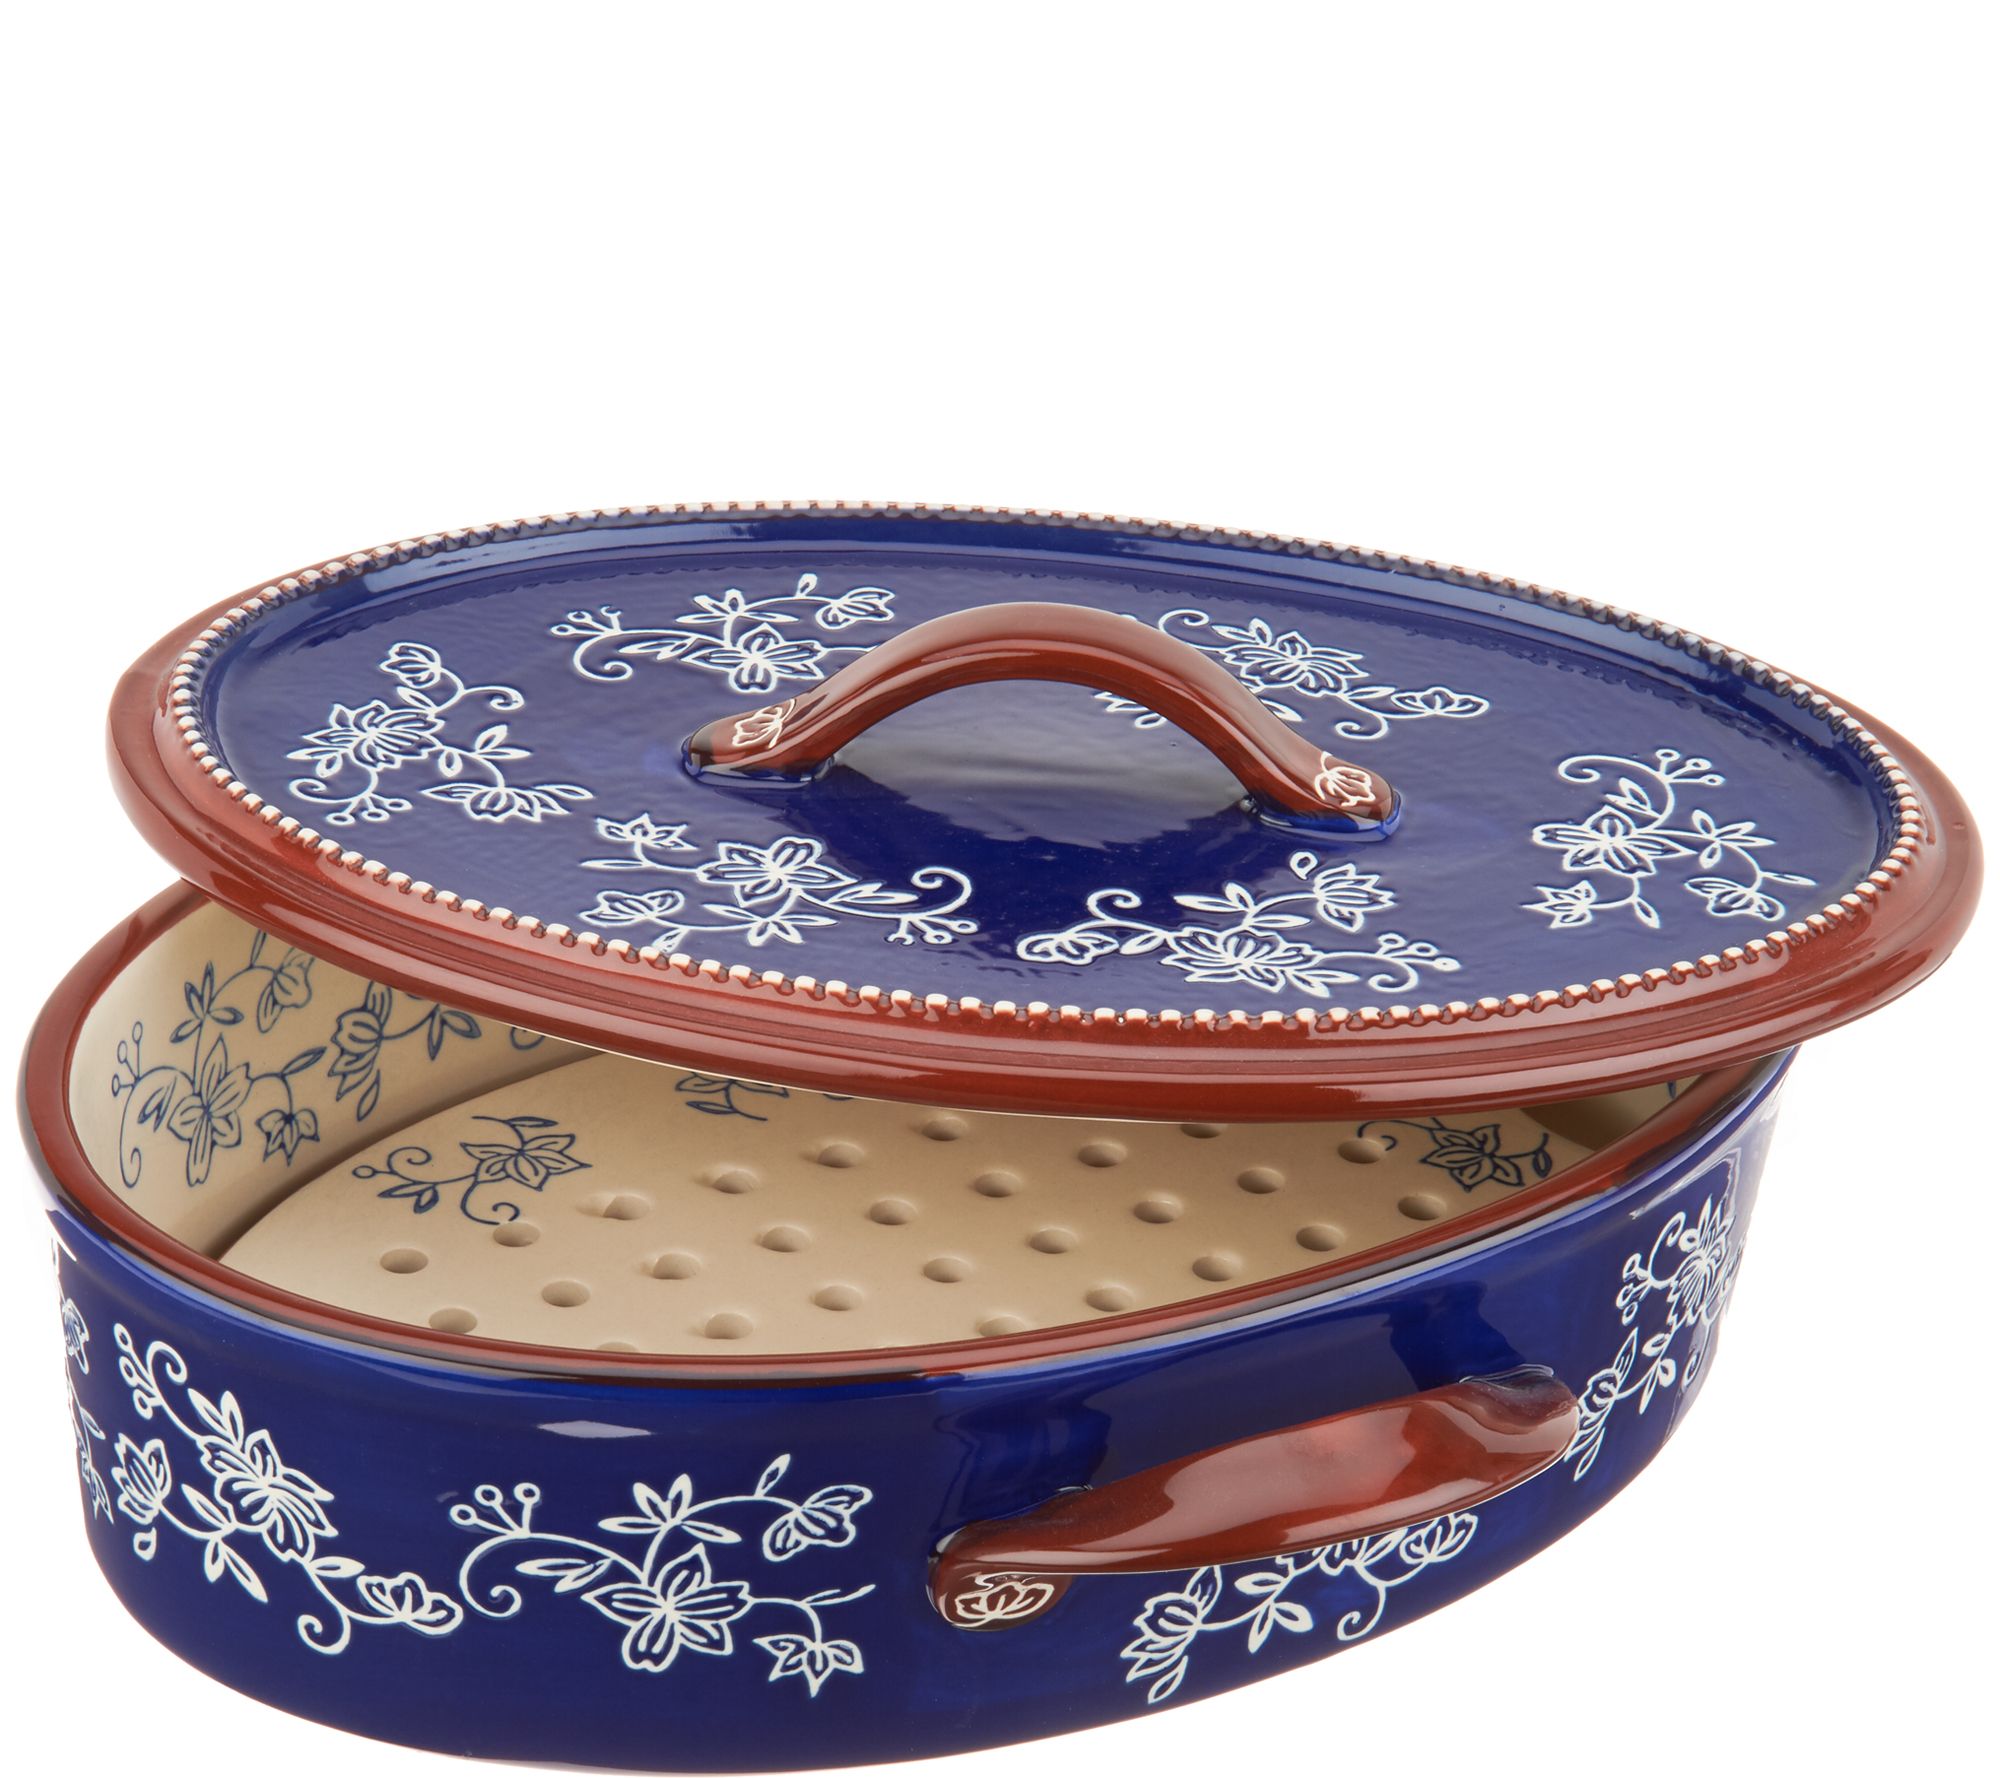 Temp-tations 6-qt Old World Floral Lace Patterned Slow Cooker 